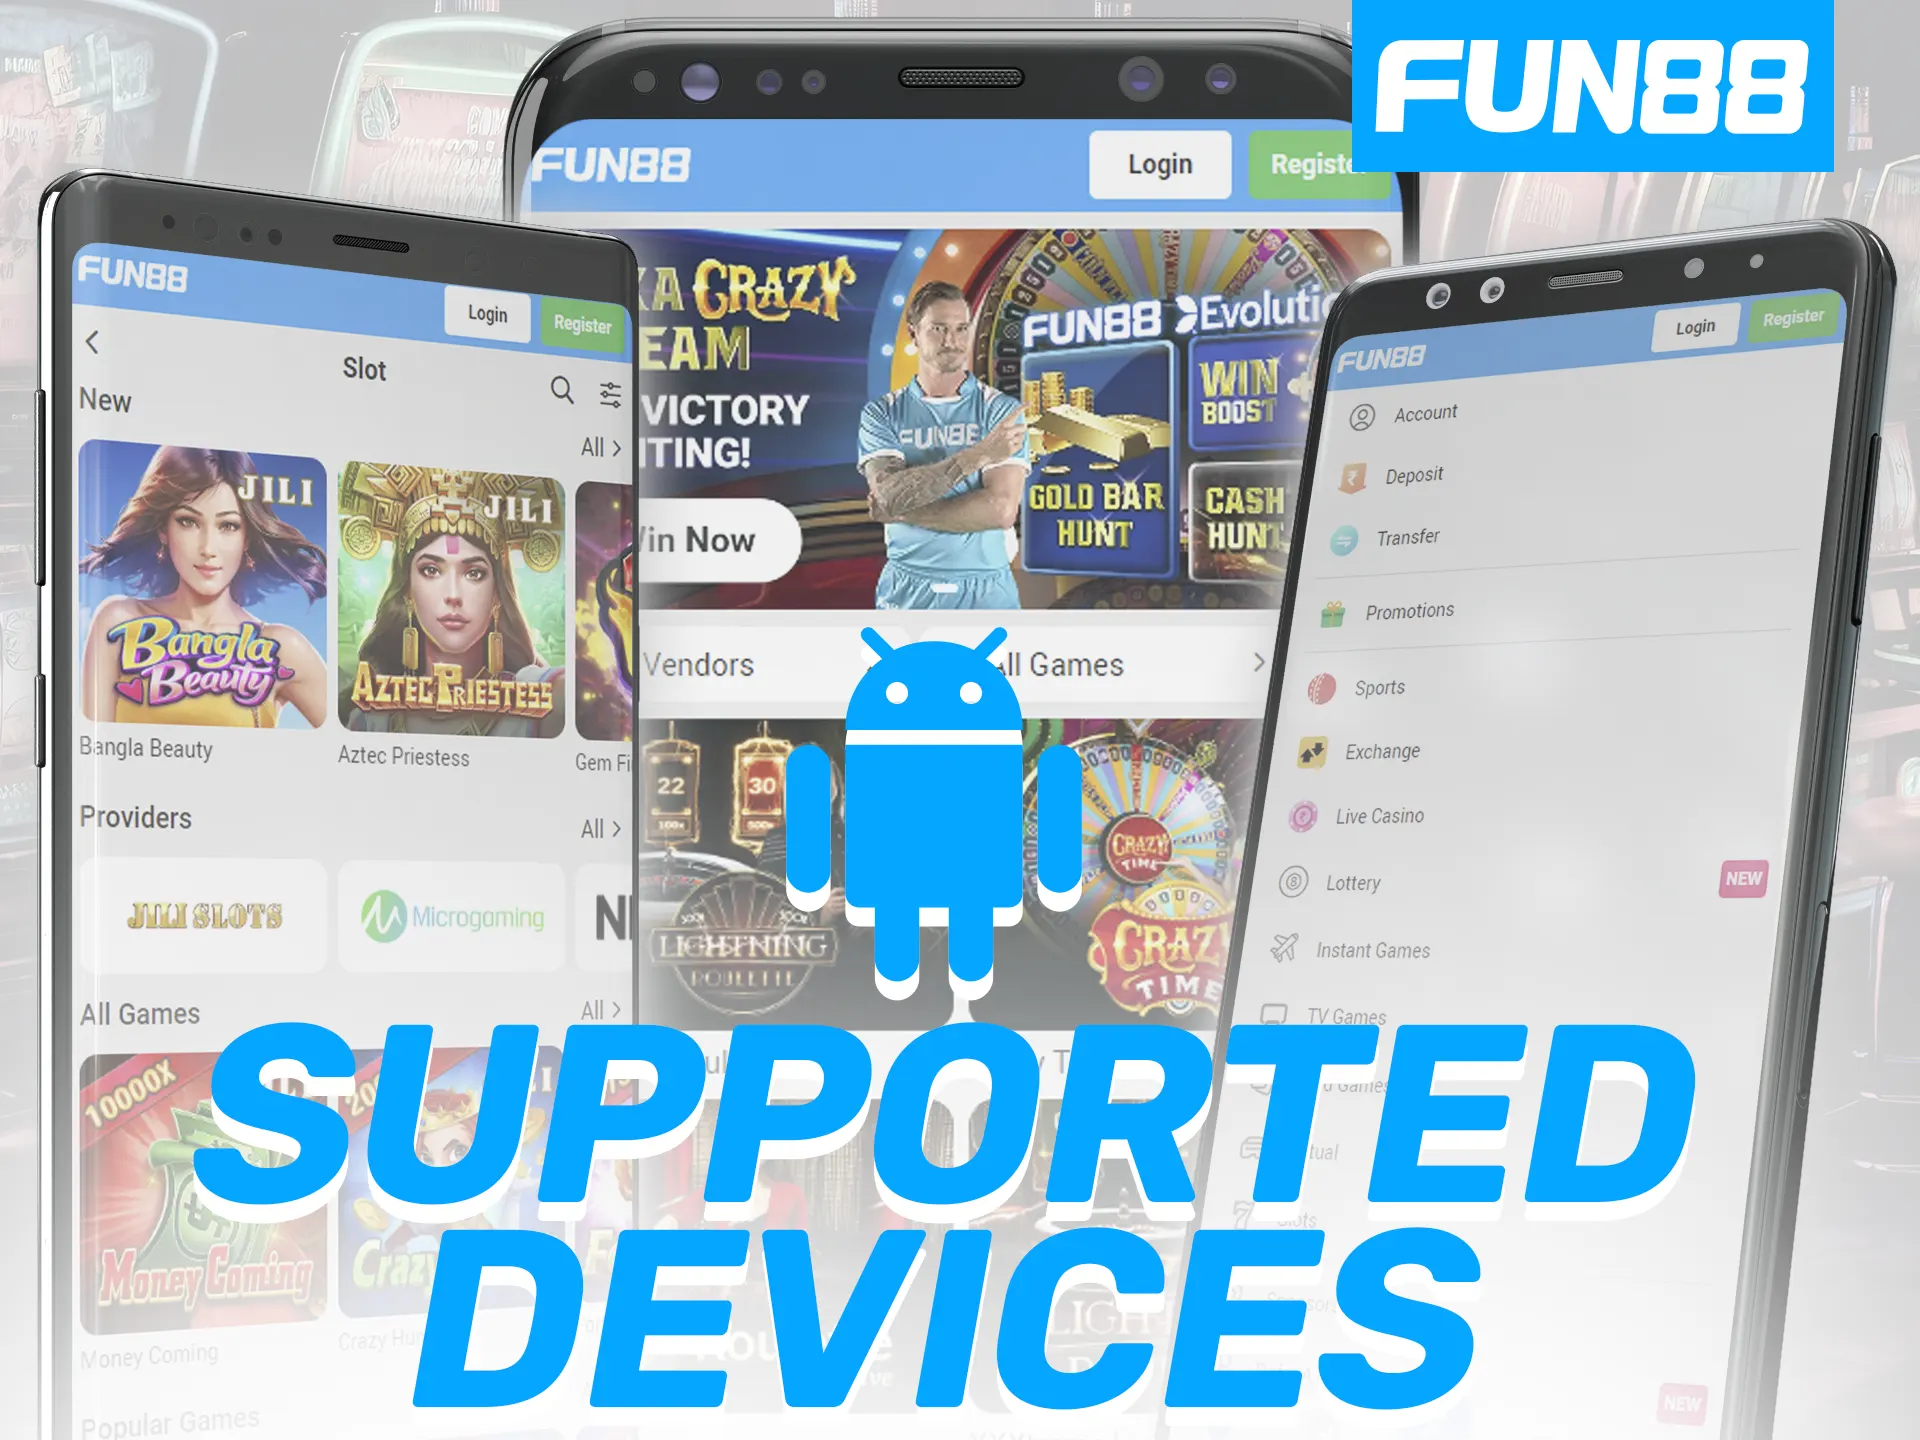 The Fun88 app supporting a big number of Android devices.